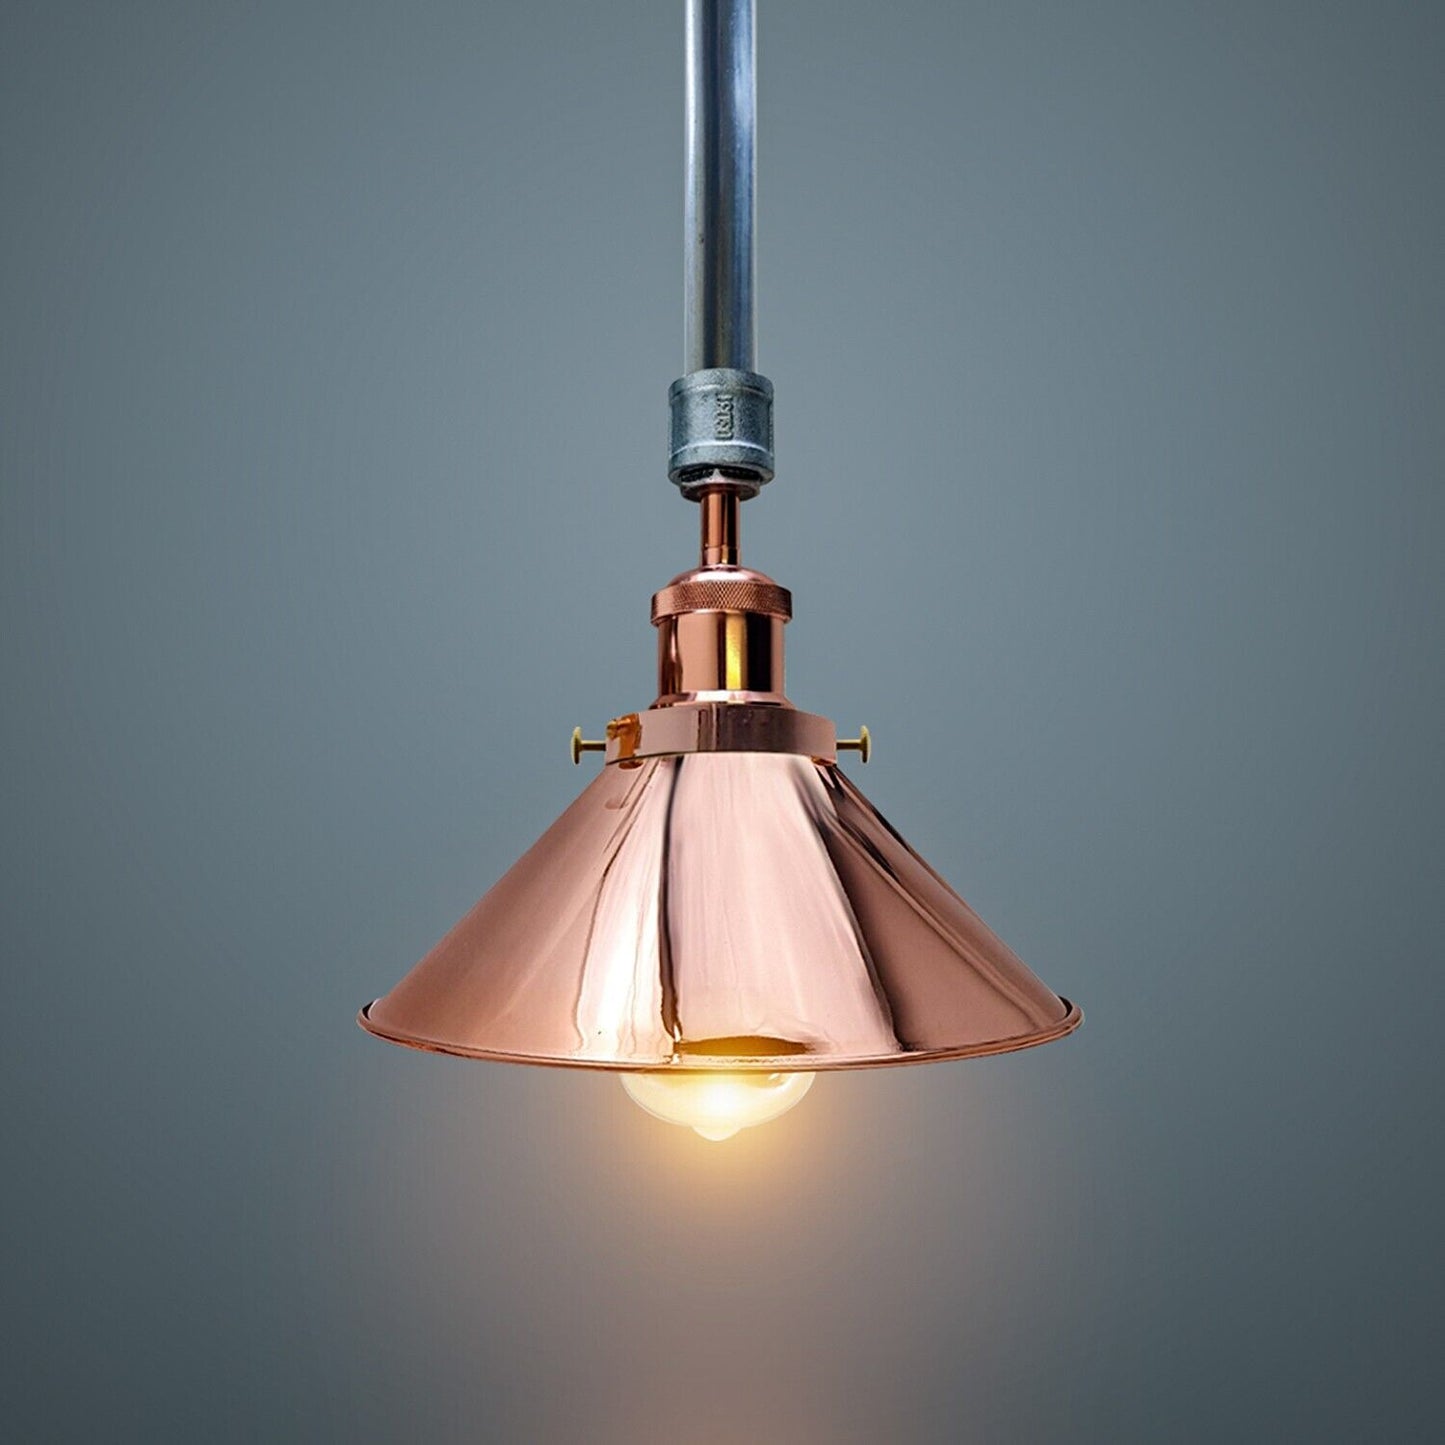 Suspended Vintage Ceiling Pipe Lights Galvanized and Rose Gold - Application Image 3